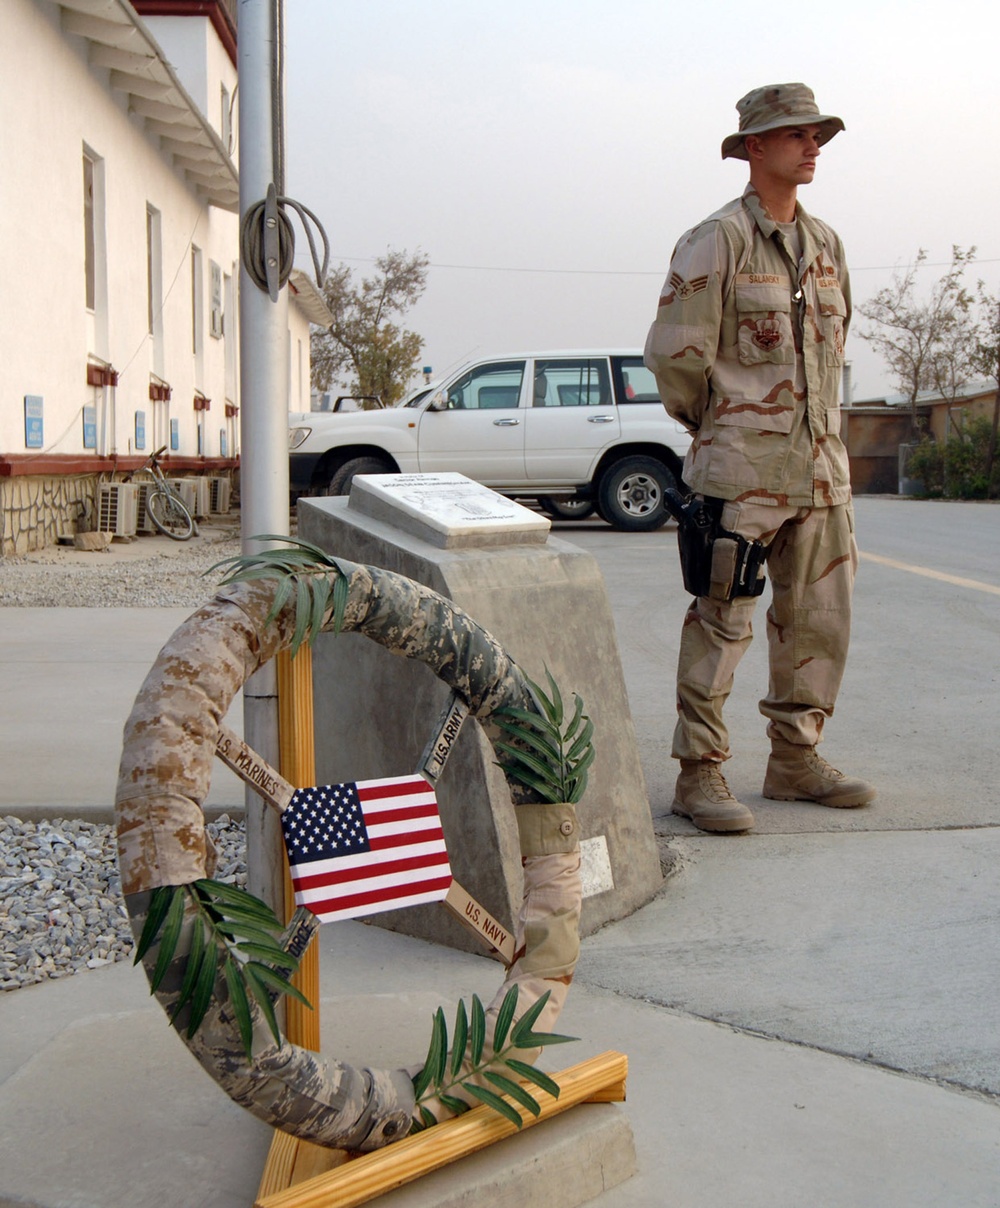 Senior Airman Michael Salansky of Uniondale, Pa., a member of the 455th Expeditionary Security Forces Squadron, stands a silent vigil here in honor of Veterans Day, Nov. 11.